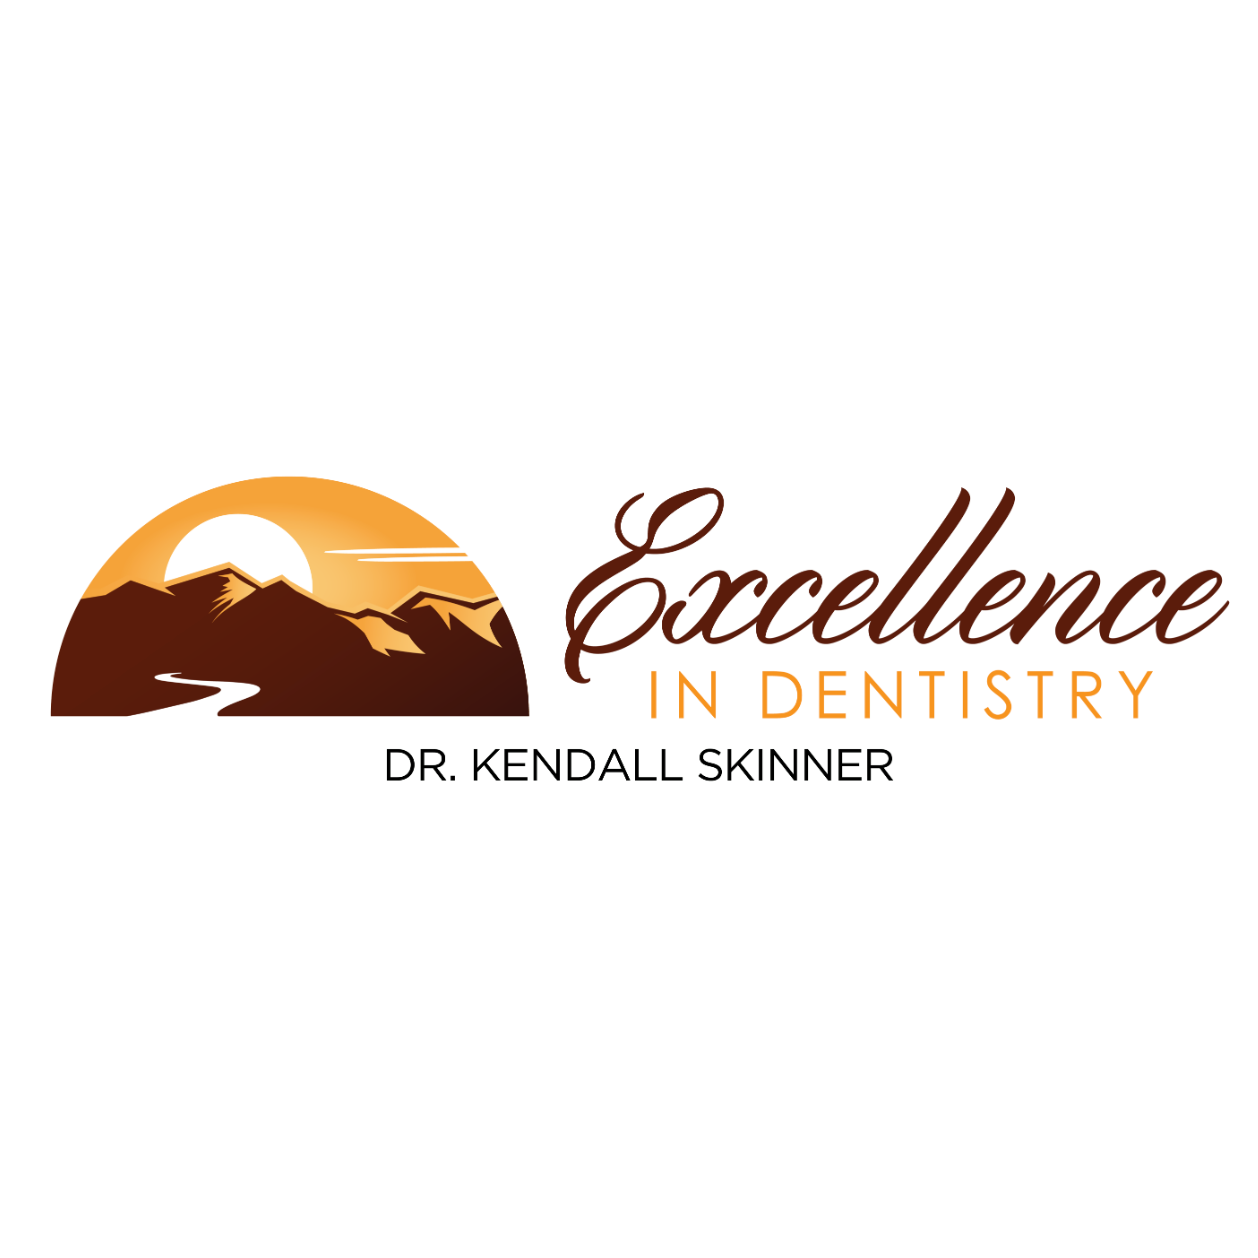 Company logo of Excellence In Dentistry: Dr. Kendall Skinner